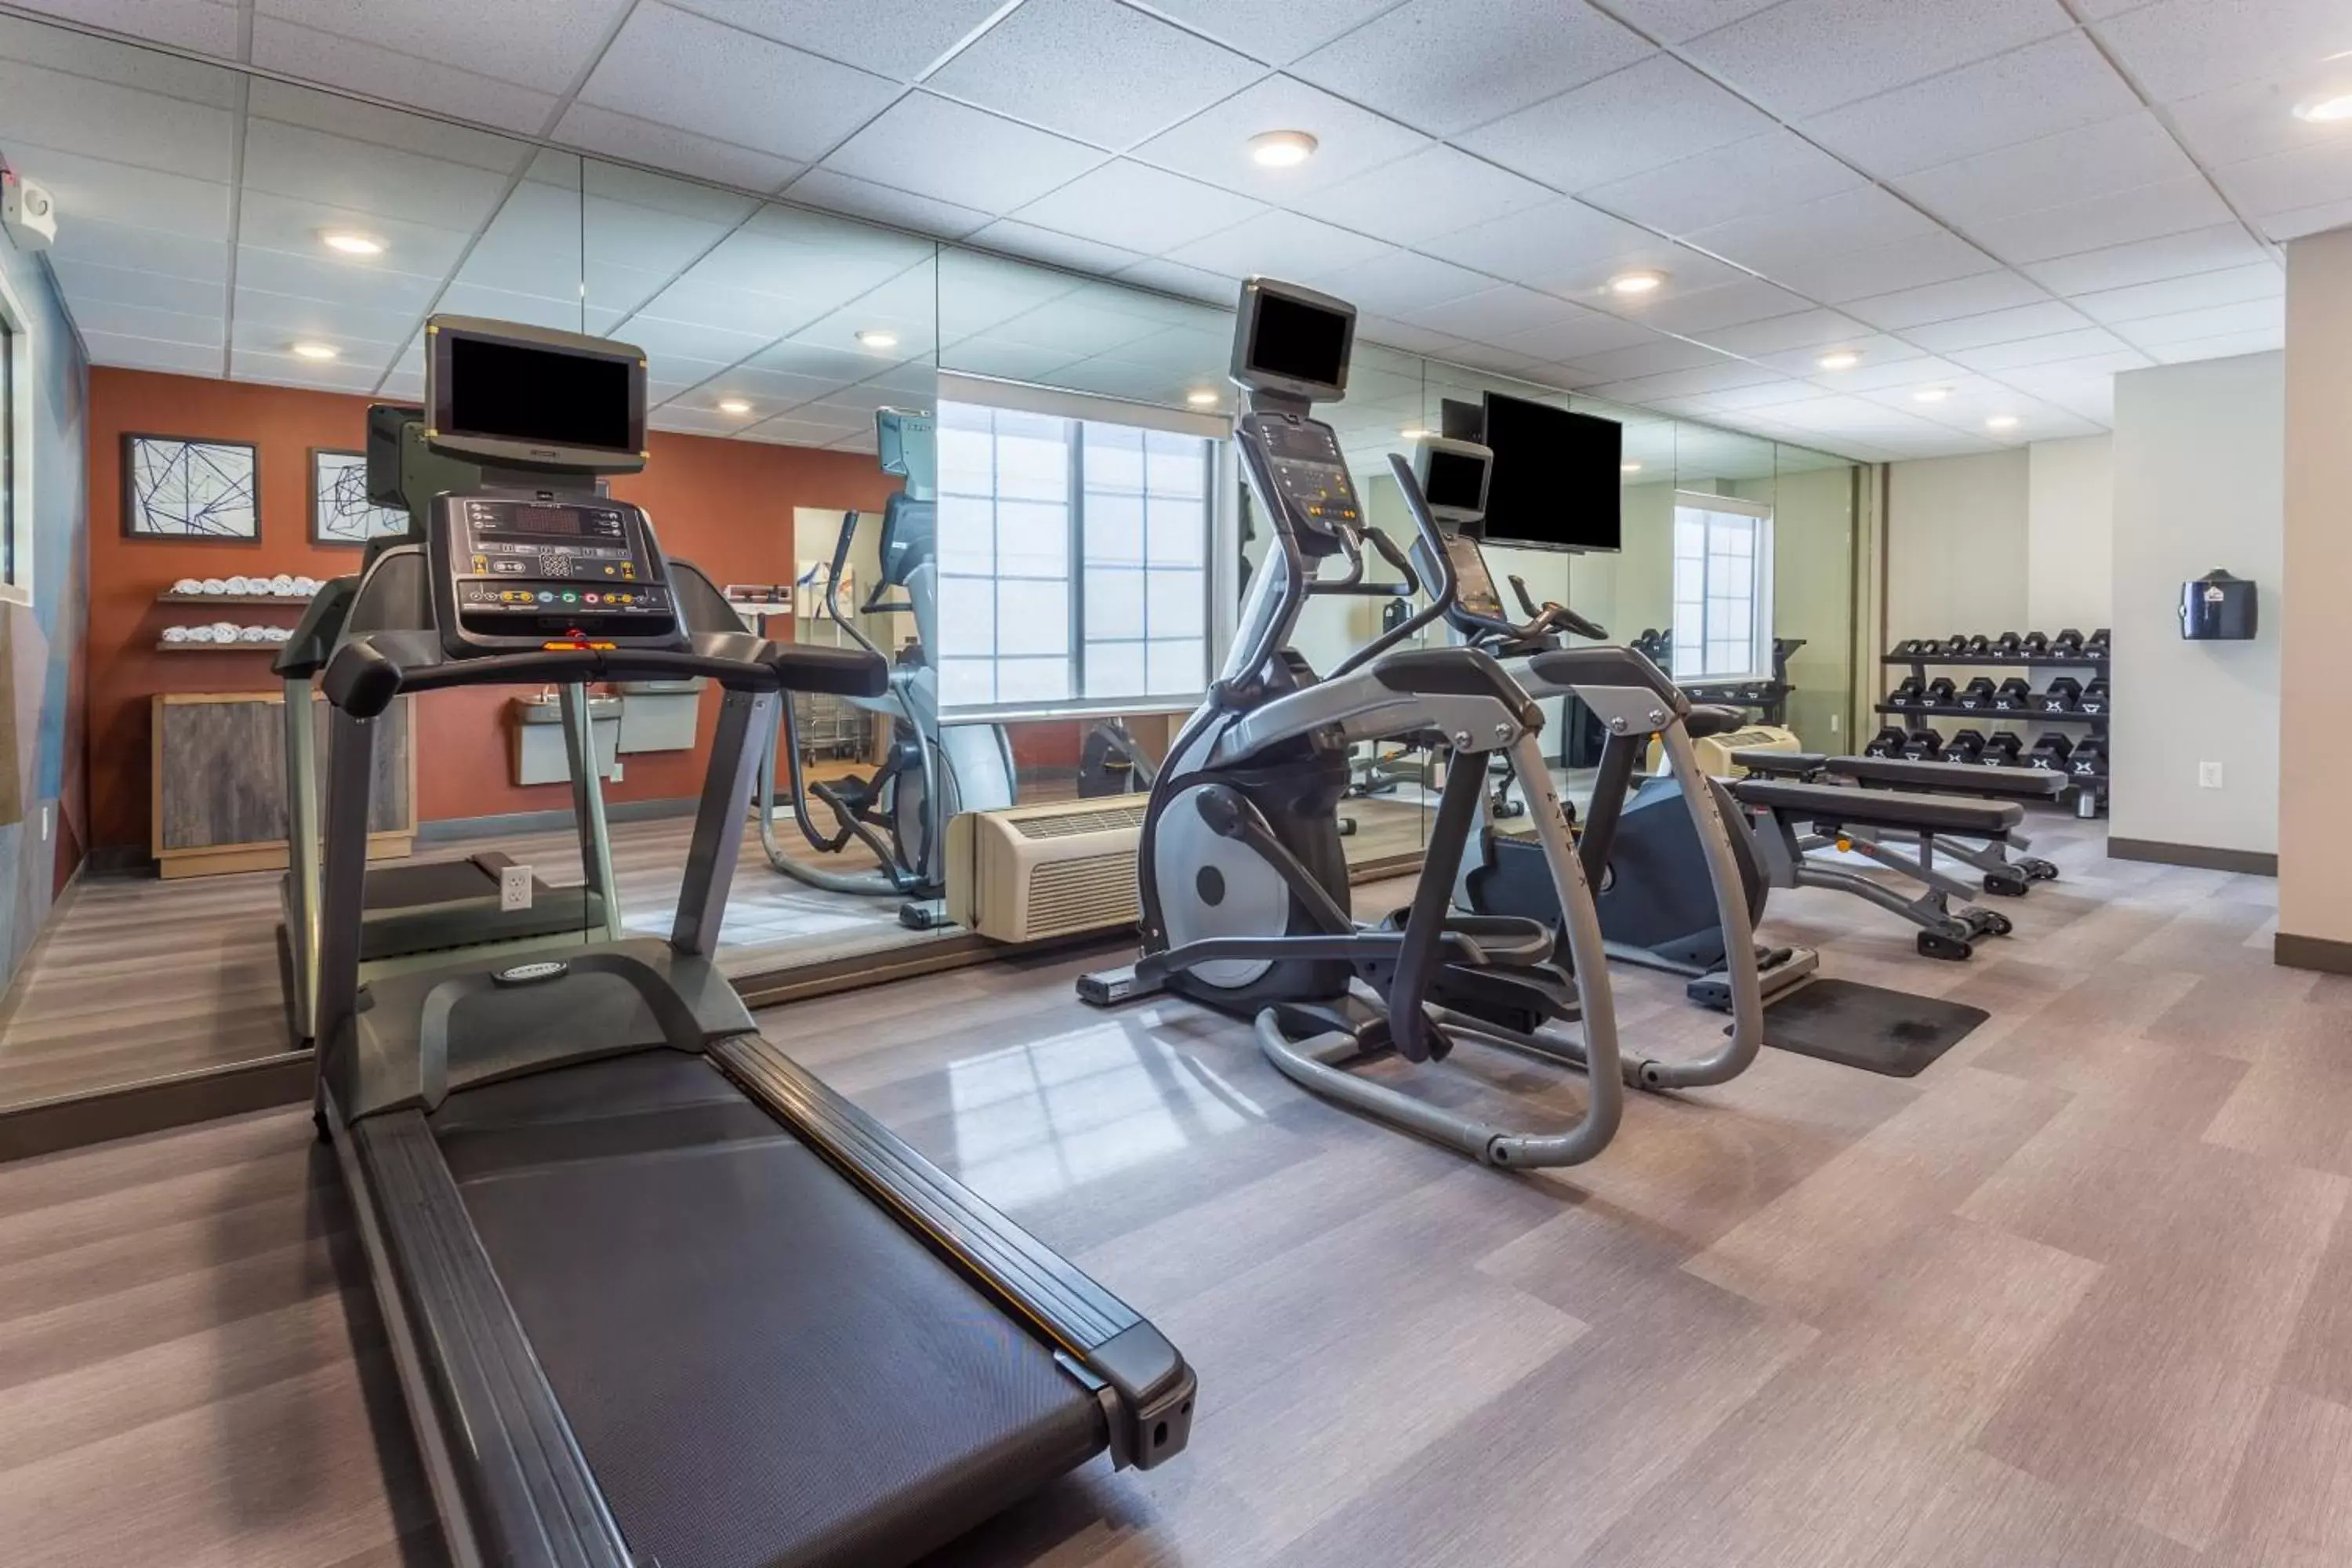 Fitness centre/facilities, Fitness Center/Facilities in Candlewood Suites Ofallon, Il - St. Louis Area, an IHG Hotel